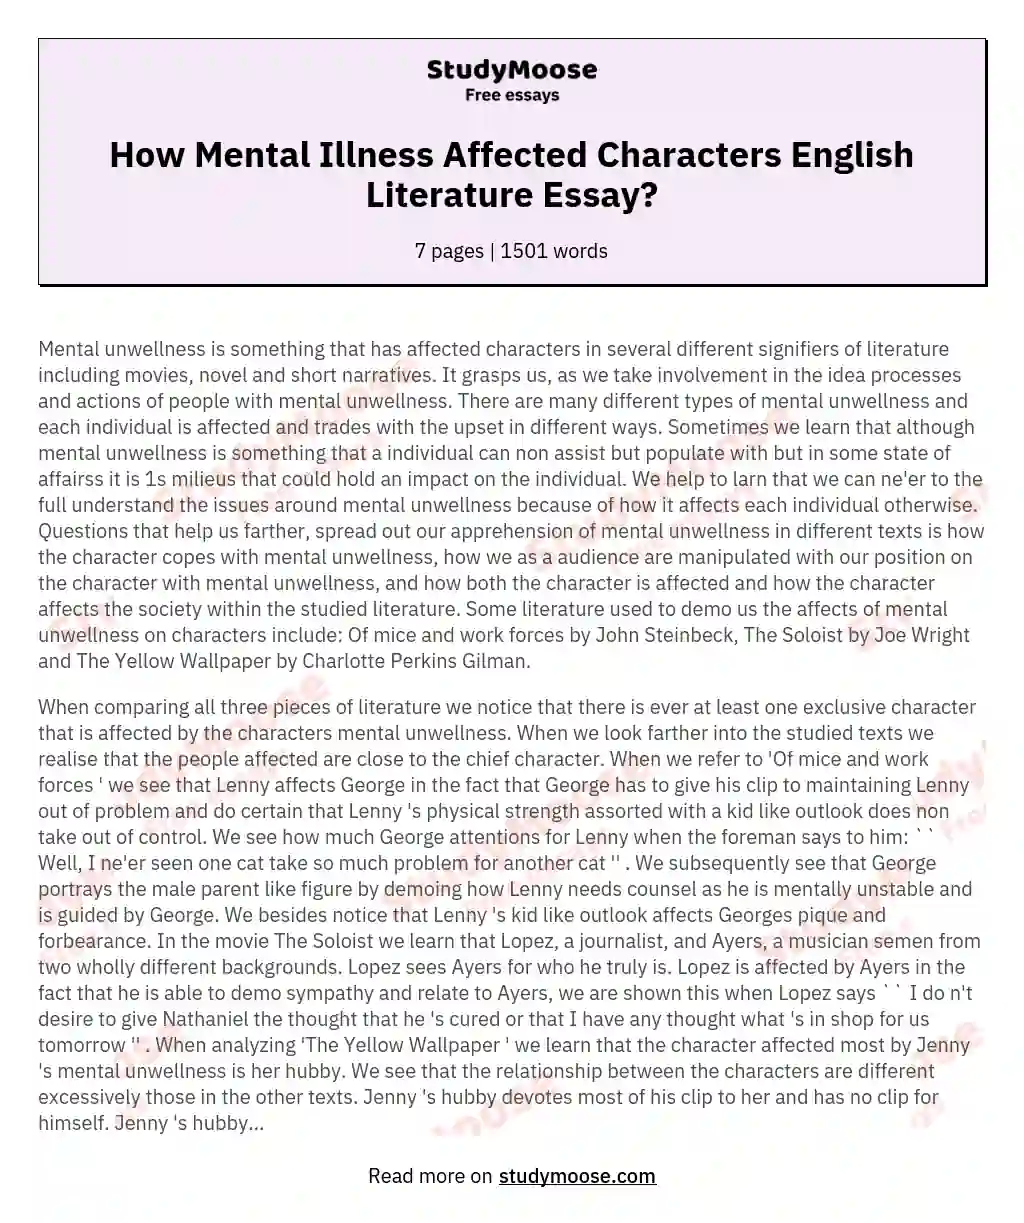 How Mental Illness Affected Characters English Literature Essay?